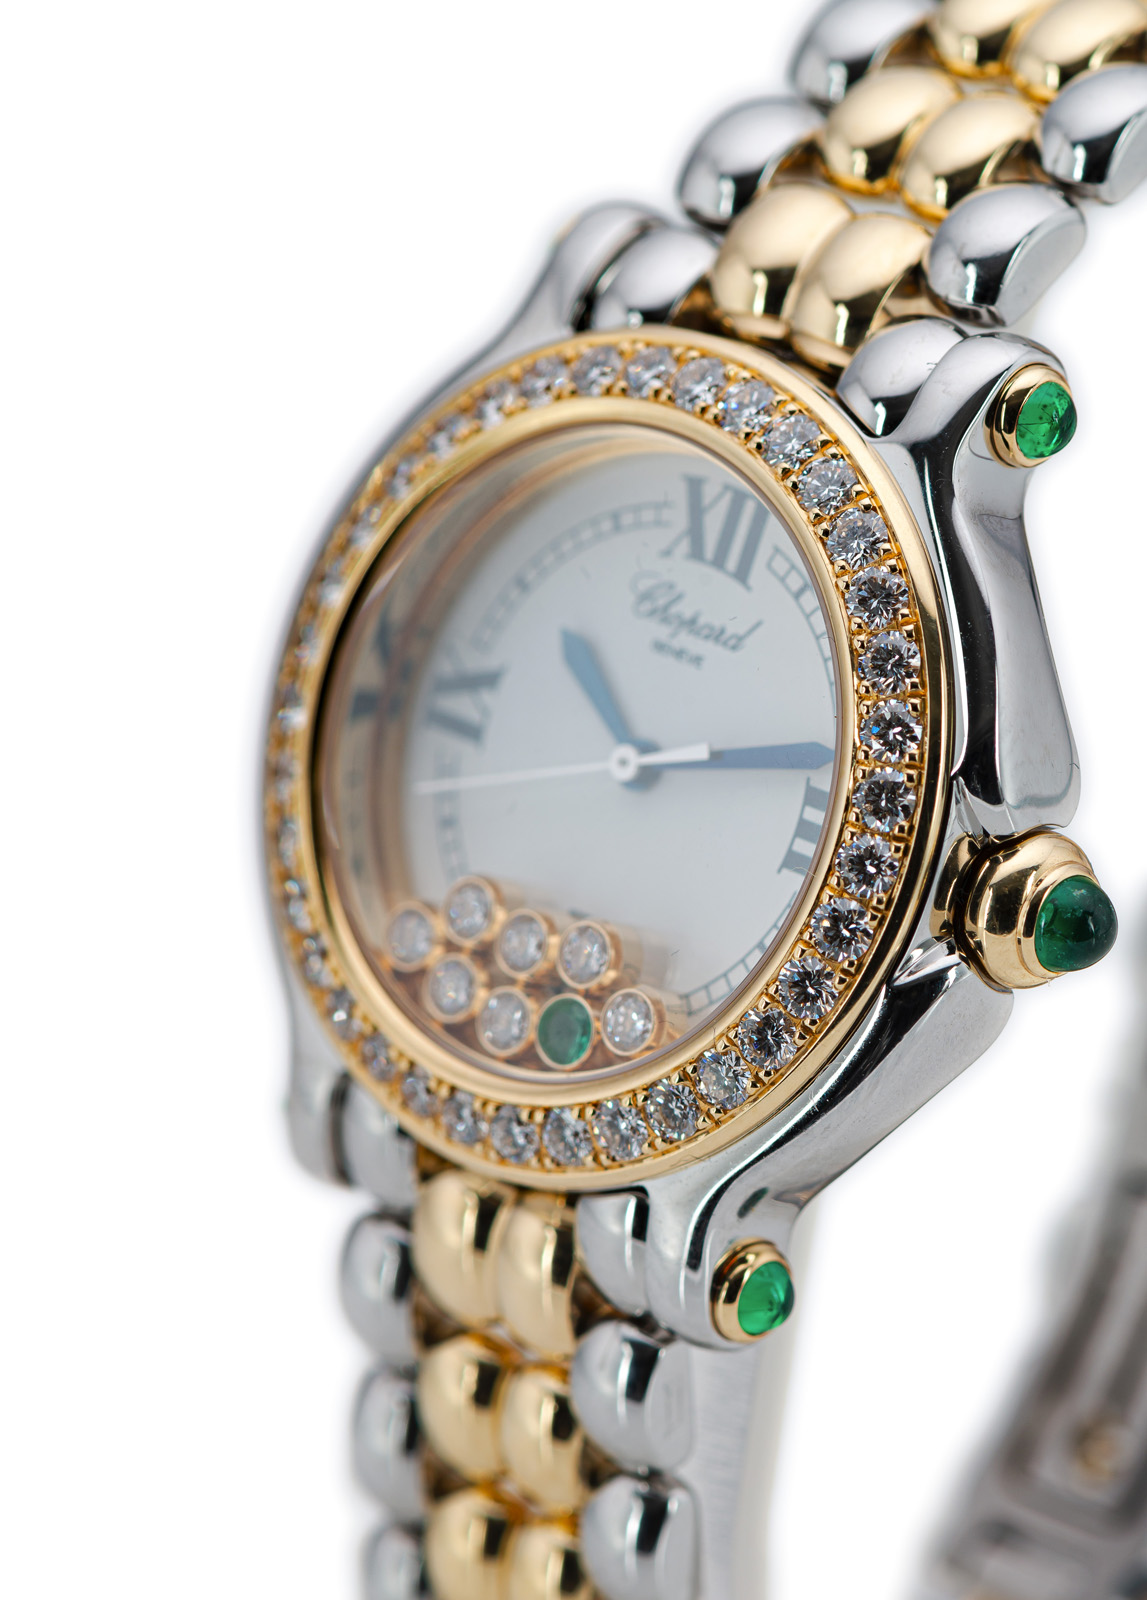 A CHOPARD LADY'S WATCH - Image 2 of 5